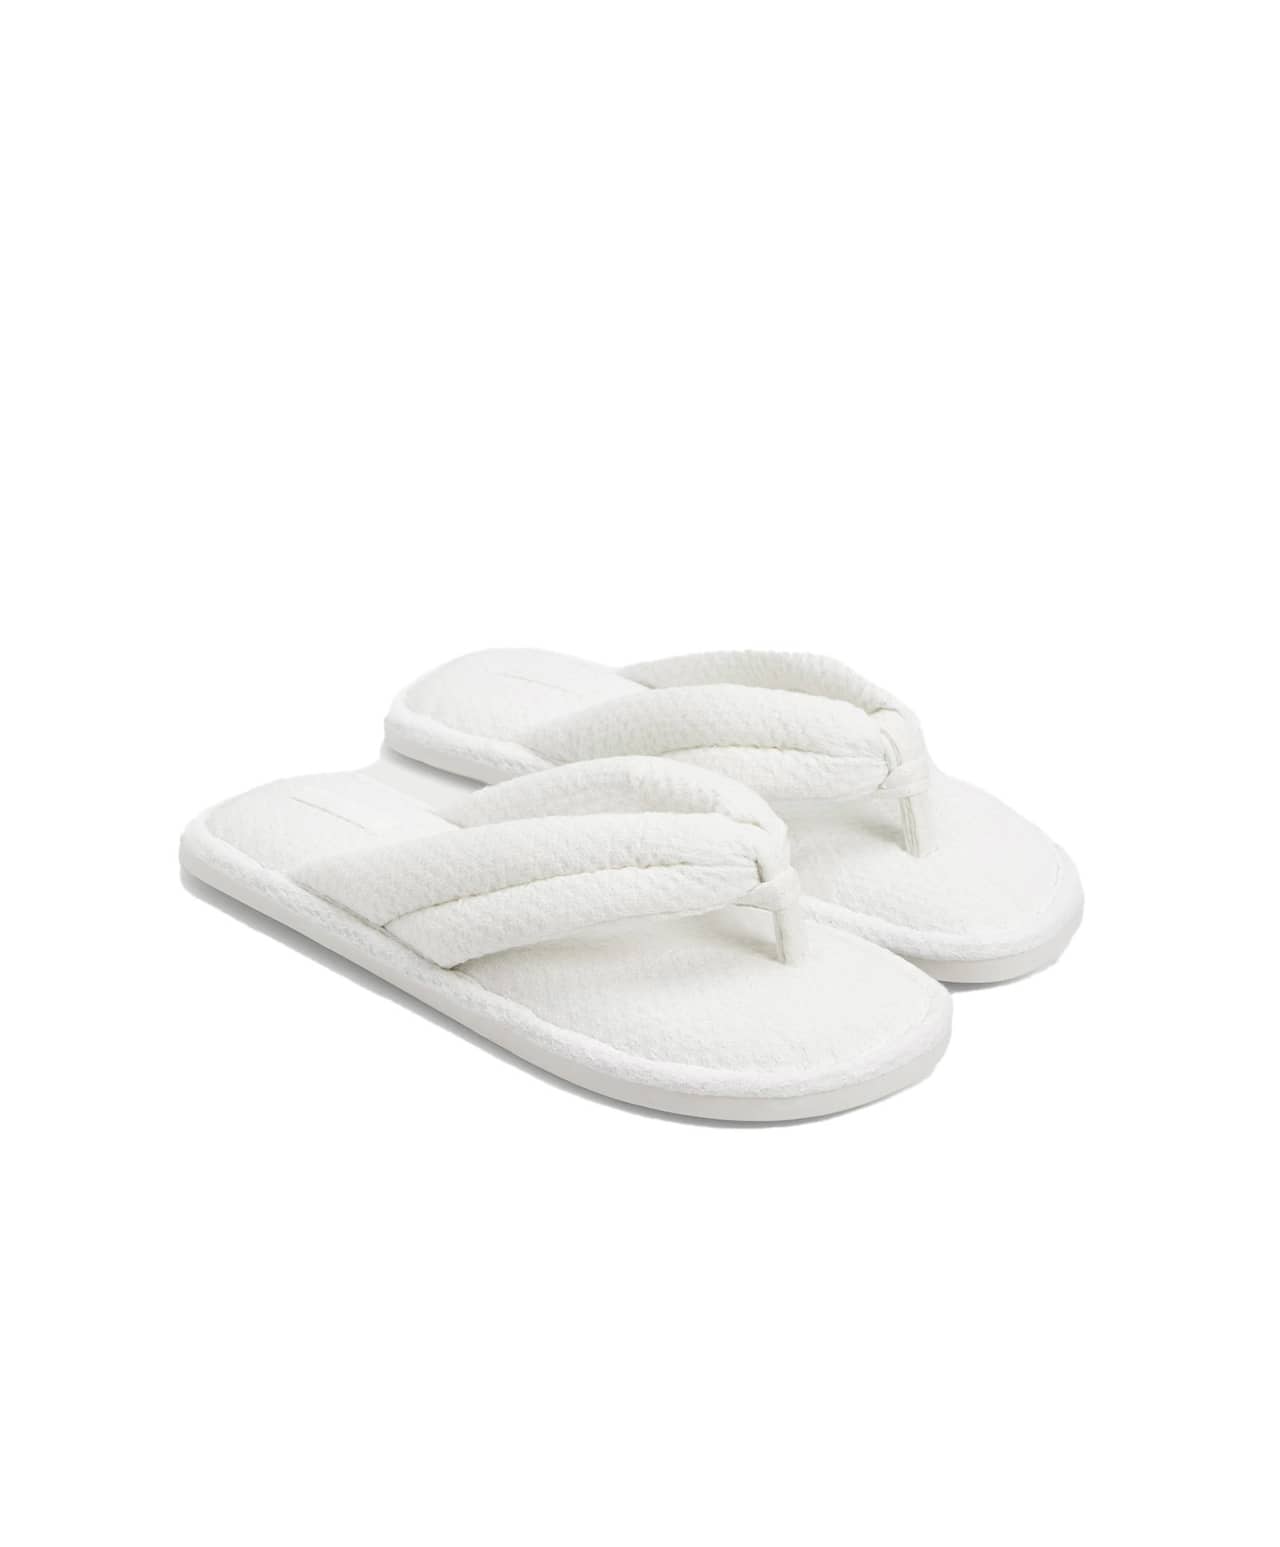 Glamorous Wide Fit Mule House Slippers